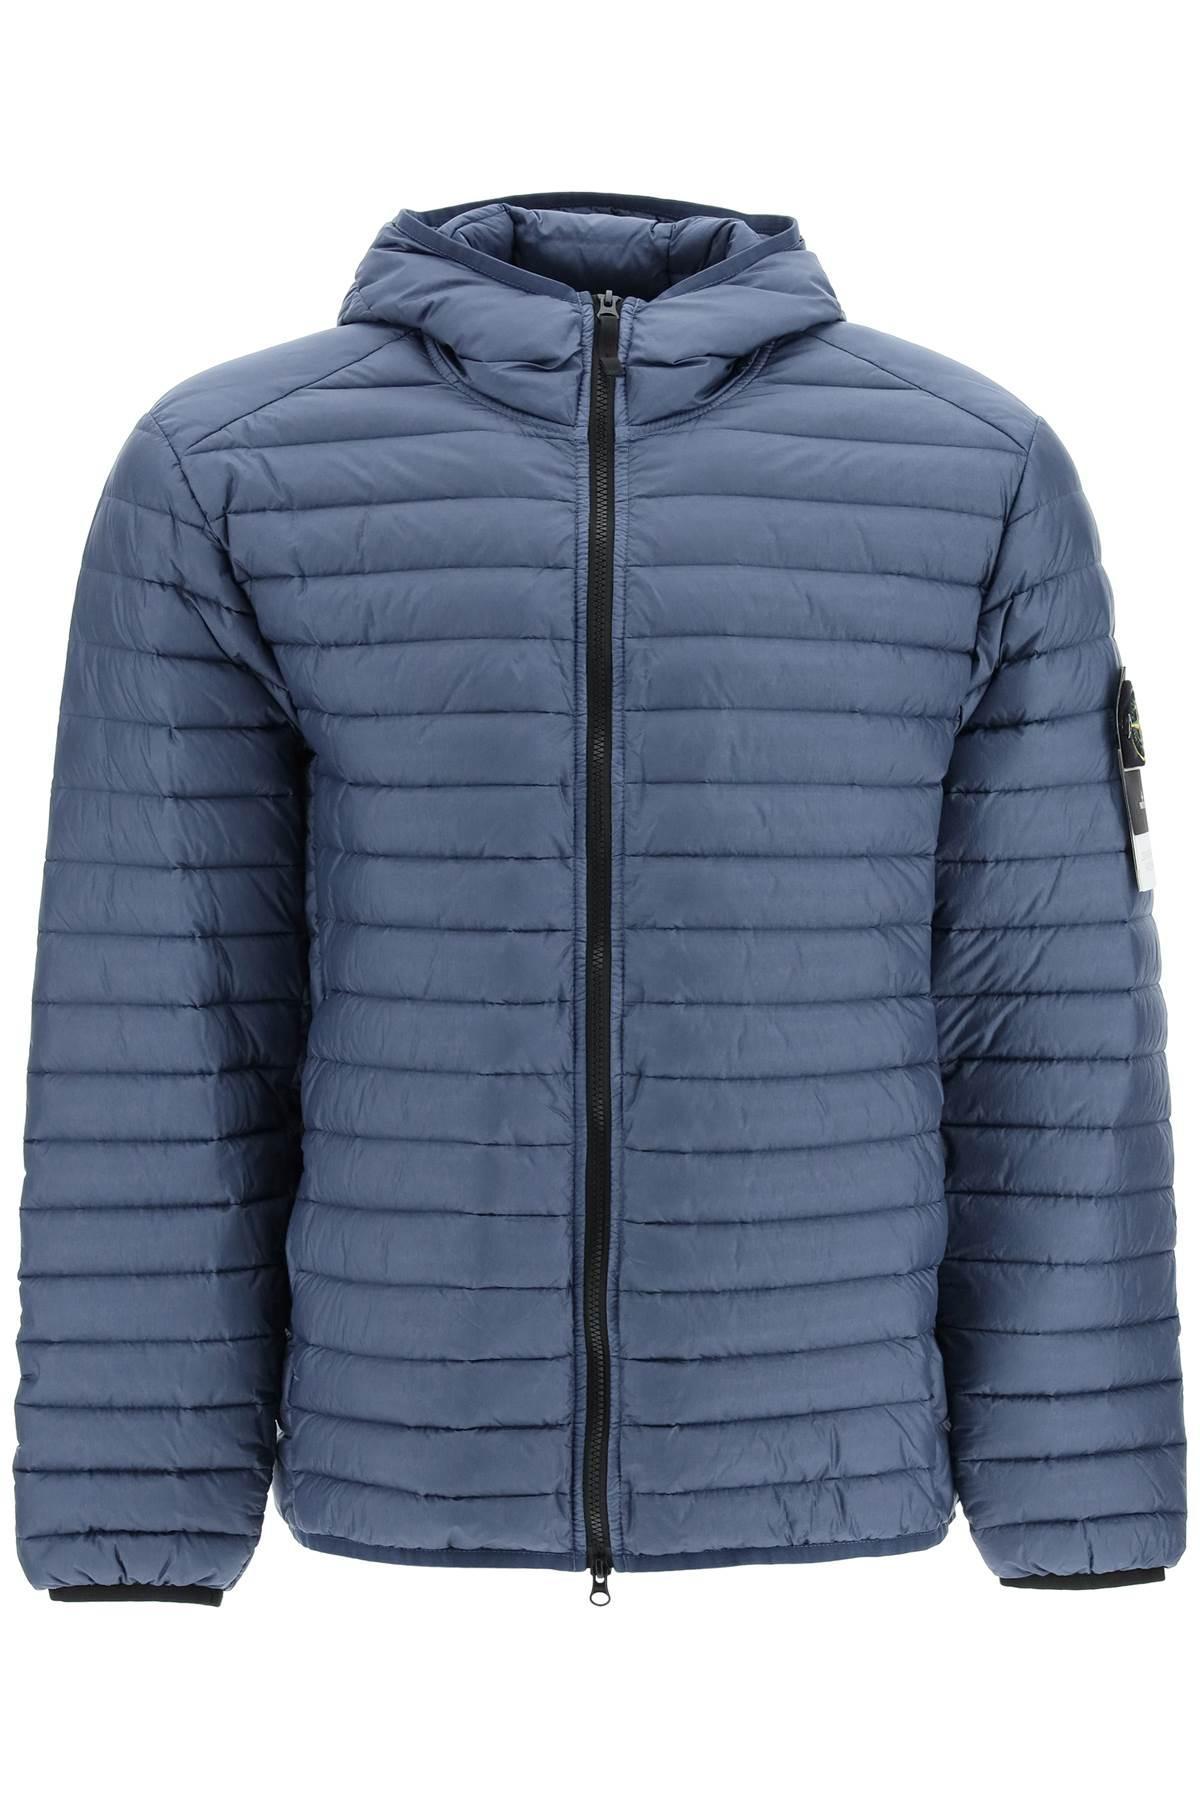 Stone Island Loom Woven Chambers R-nylon Down-tc Jacket in Blue for Men ...